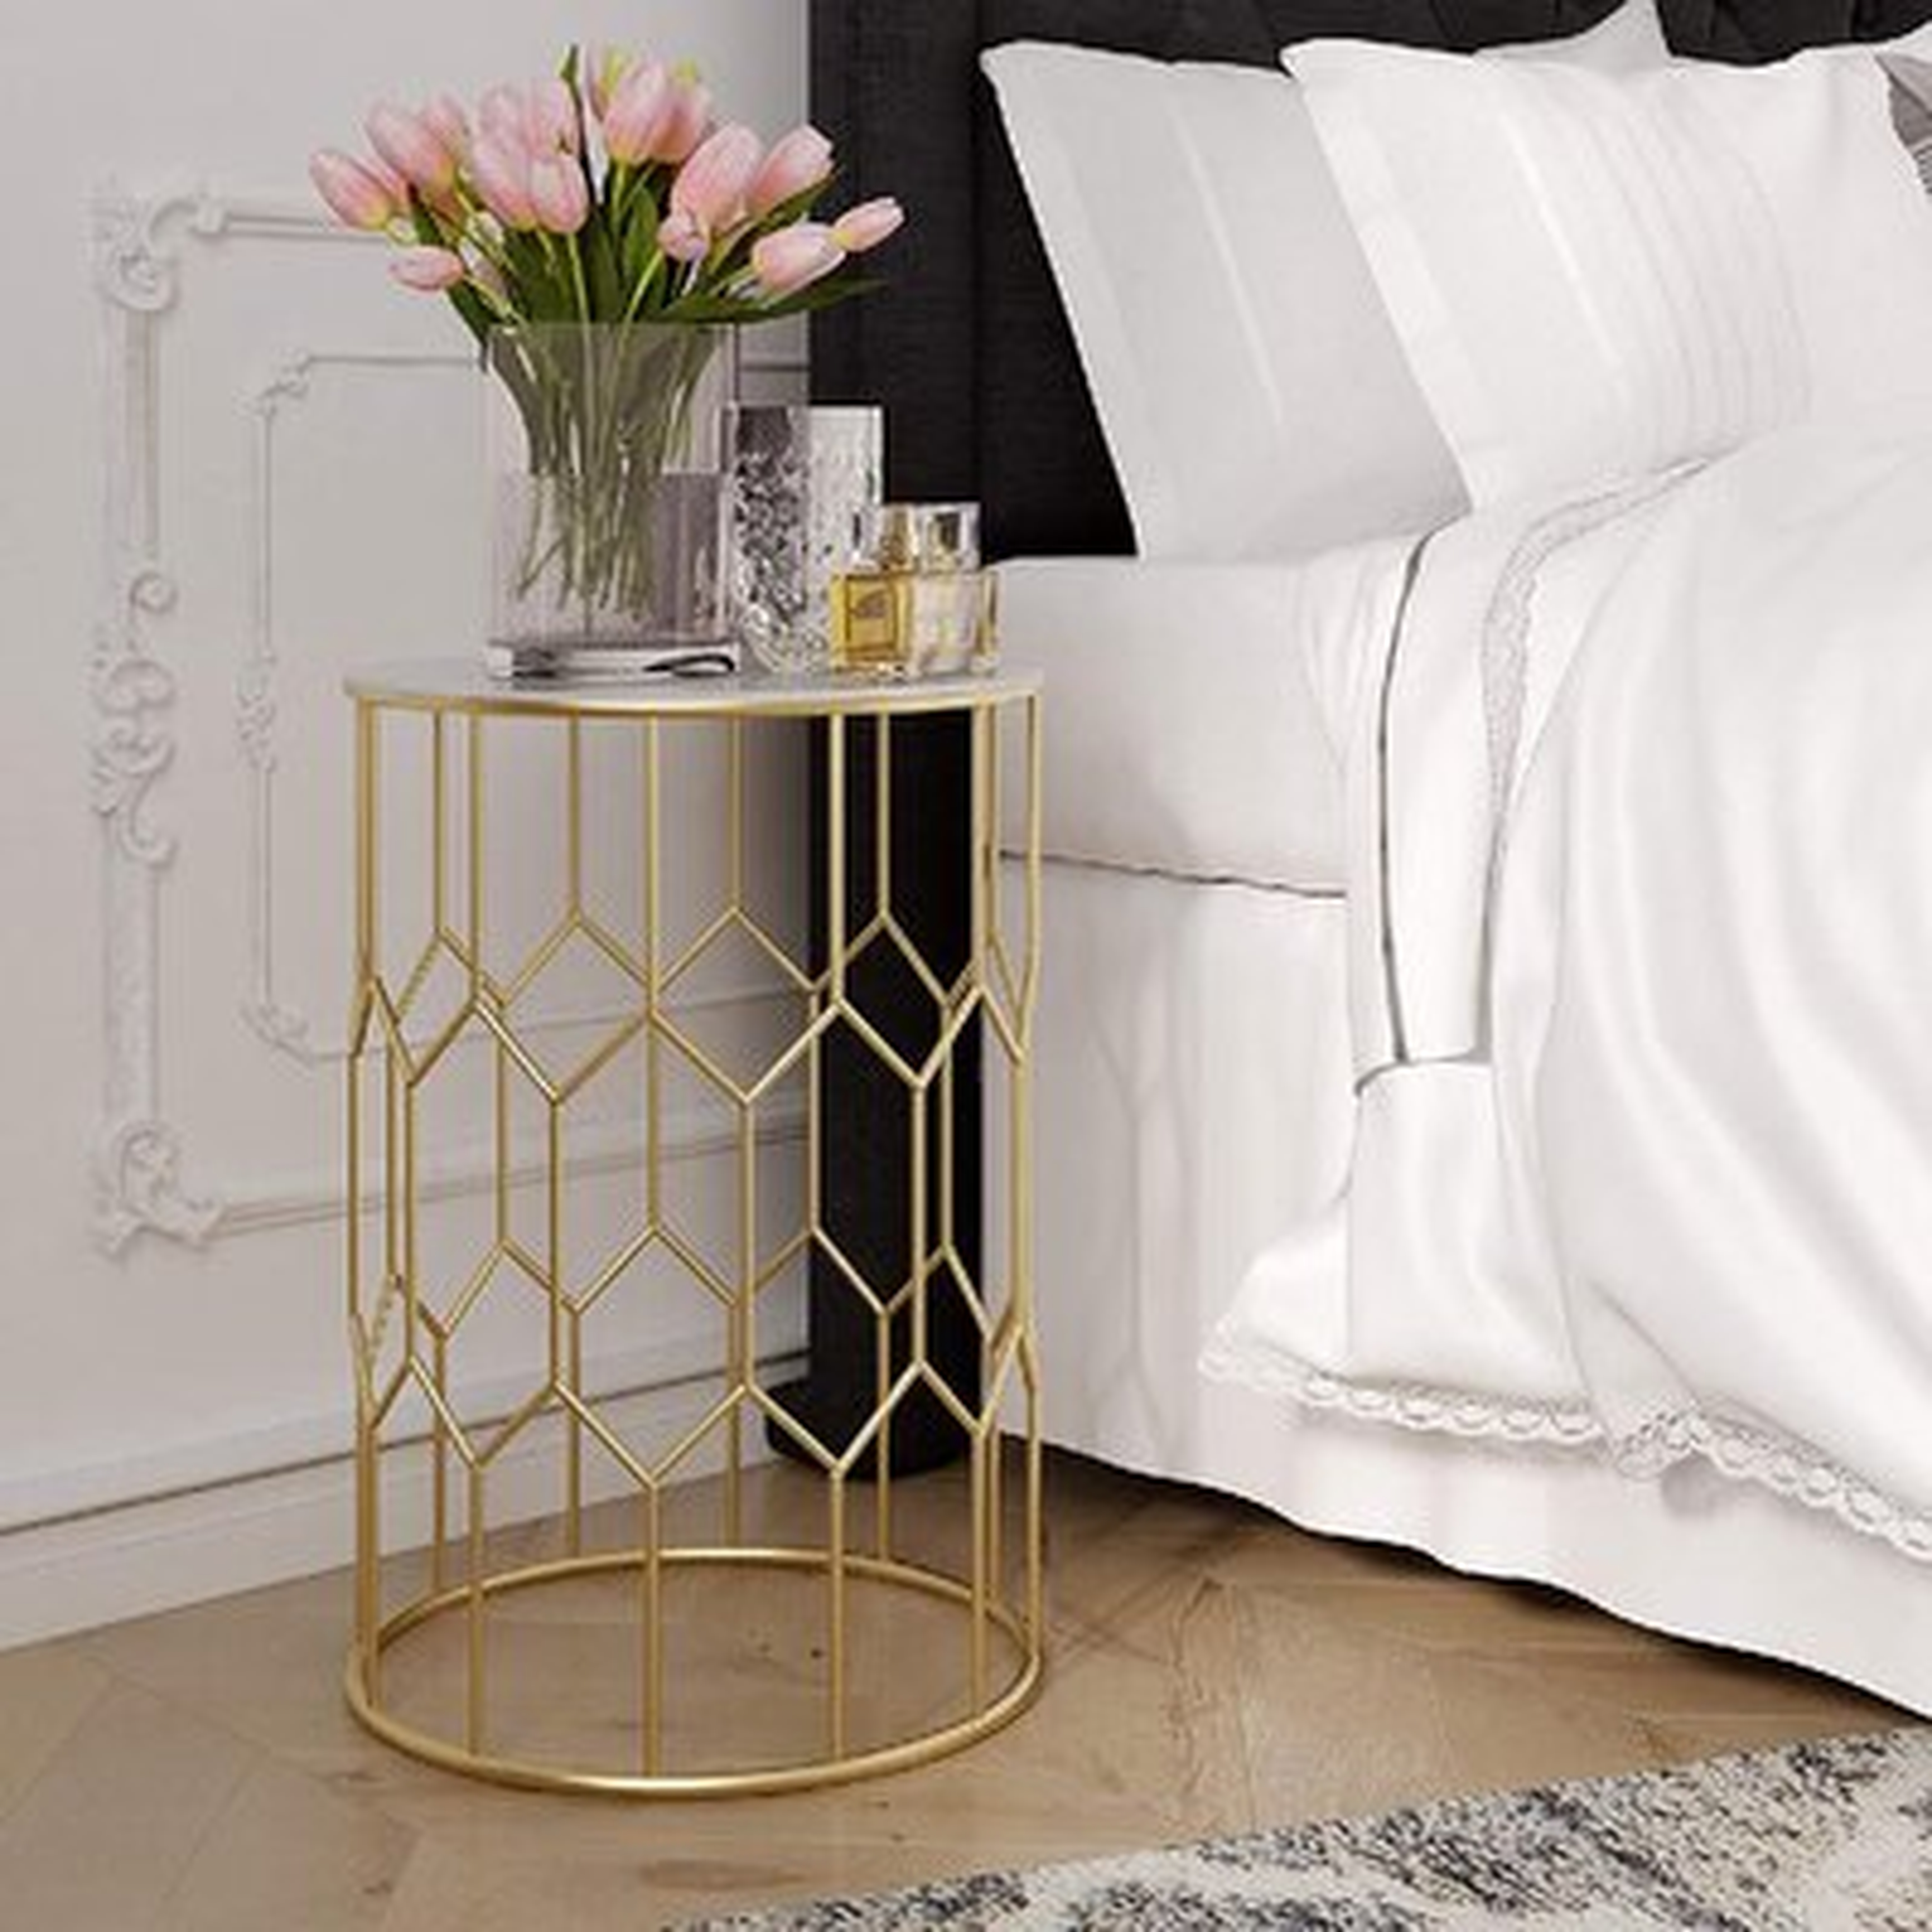 Glass And Metal Side Table, Gold Geometric Ative Drum Small Accent For Living Room, 15.75" Wide Tabletop - Wayfair